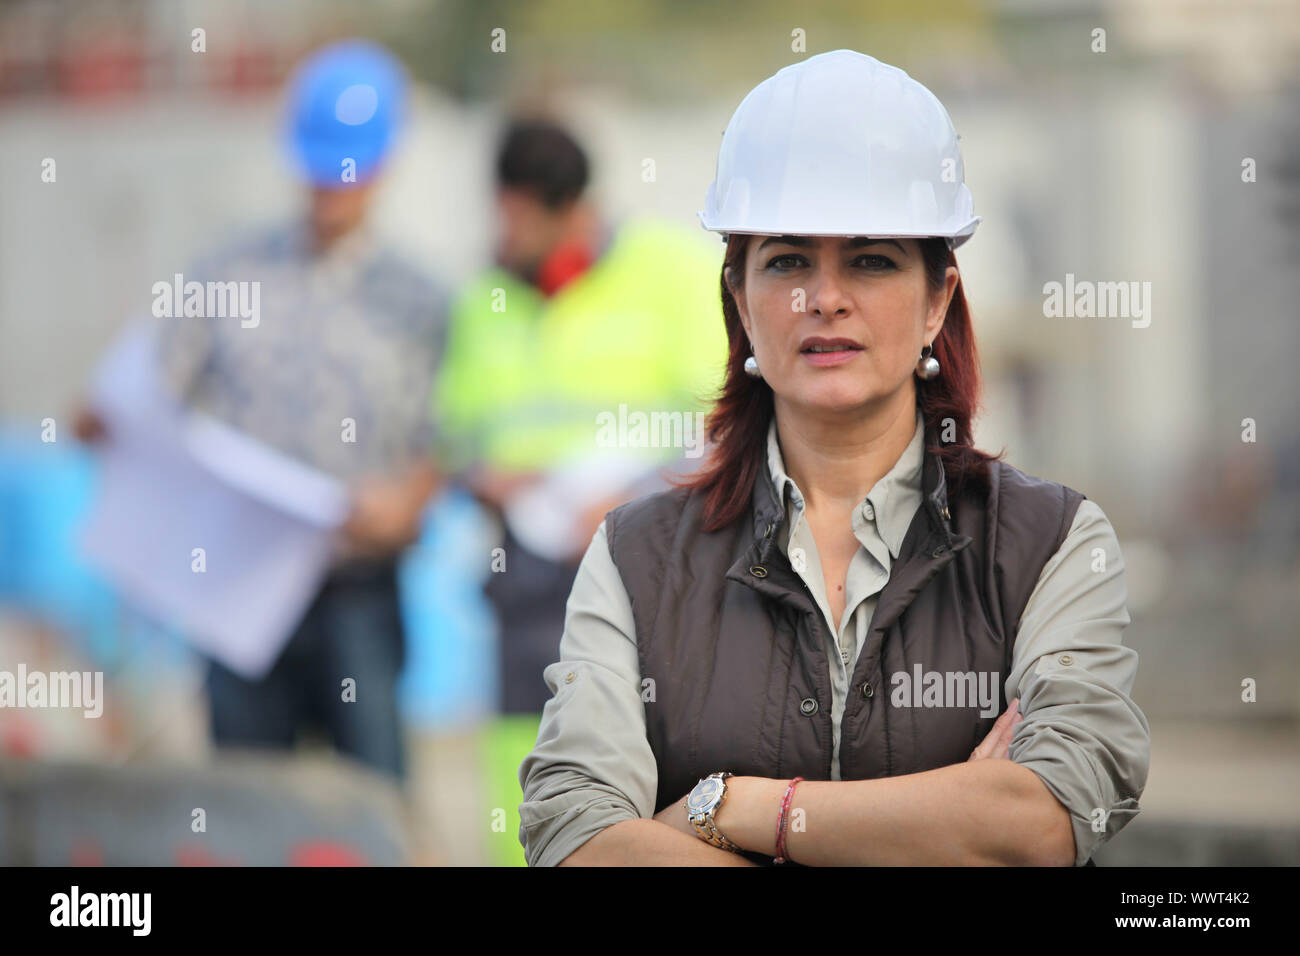 Woman on a construction site Stock Photo